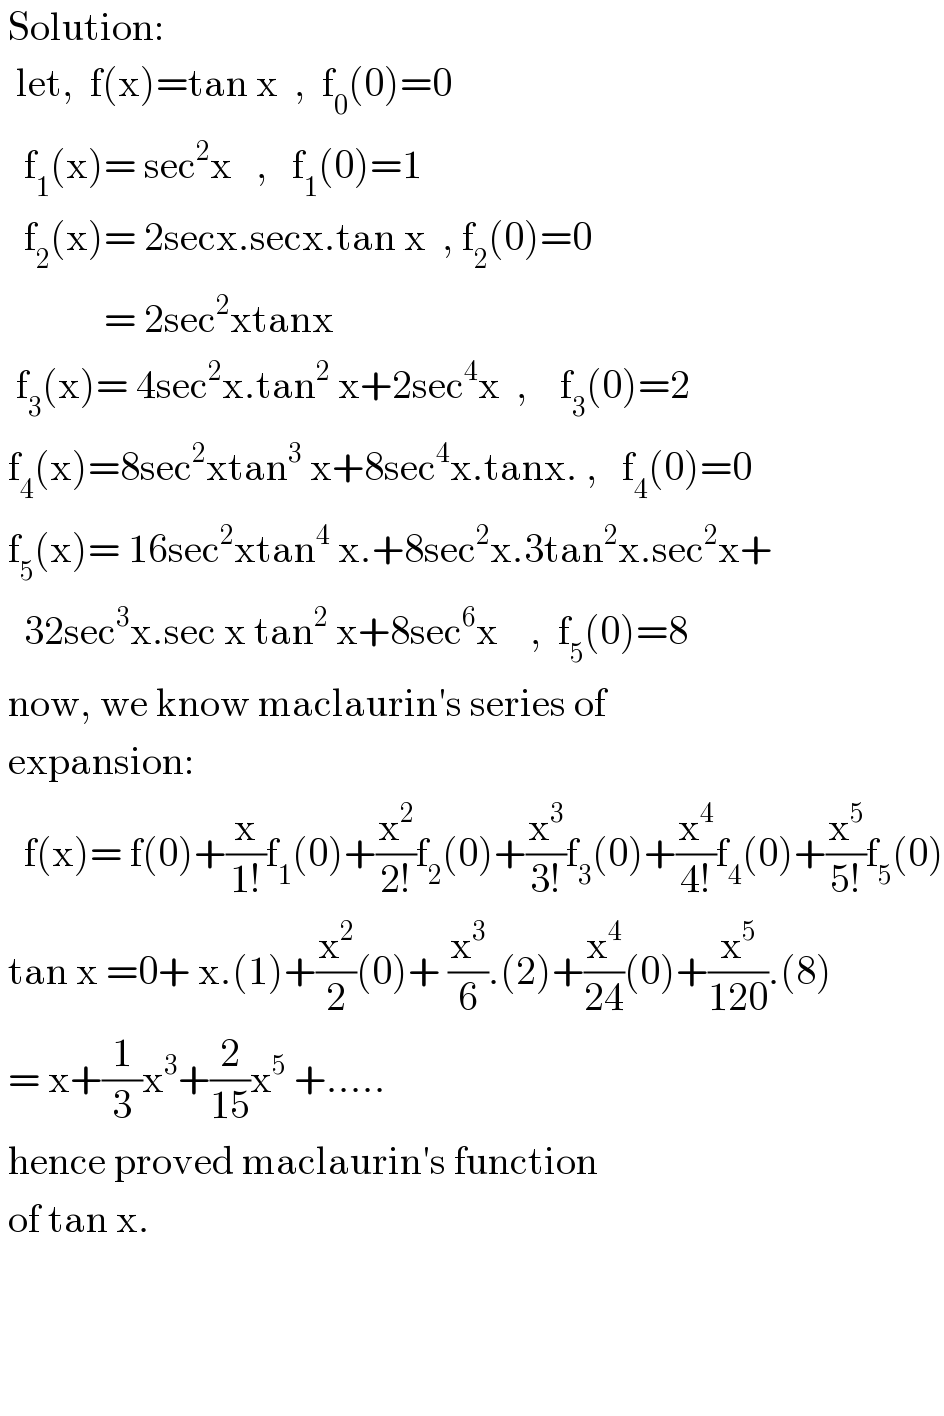  Solution:    let,  f(x)=tan x  ,  f_0 (0)=0     f_1 (x)= sec^2 x   ,   f_1 (0)=1     f_2 (x)= 2secx.secx.tan x  , f_2 (0)=0               = 2sec^2 xtanx    f_3 (x)= 4sec^2 x.tan^2  x+2sec^4 x  ,    f_3 (0)=2   f_4 (x)=8sec^2 xtan^3  x+8sec^4 x.tanx. ,   f_4 (0)=0   f_5 (x)= 16sec^2 xtan^4  x.+8sec^2 x.3tan^2 x.sec^2 x+     32sec^3 x.sec x tan^2  x+8sec^6 x    ,  f_5 (0)=8   now, we know maclaurin′s series of   expansion:     f(x)= f(0)+(x/(1!))f_1 (0)+(x^2 /(2!))f_2 (0)+(x^3 /(3!))f_3 (0)+(x^4 /(4!))f_4 (0)+(x^5 /(5!))f_5 (0)   tan x =0+ x.(1)+(x^2 /2)(0)+ (x^3 /6).(2)+(x^4 /(24))(0)+(x^5 /(120)).(8)   = x+(1/3)x^3 +(2/(15))x^5  +.....   hence proved maclaurin′s function   of tan x.        